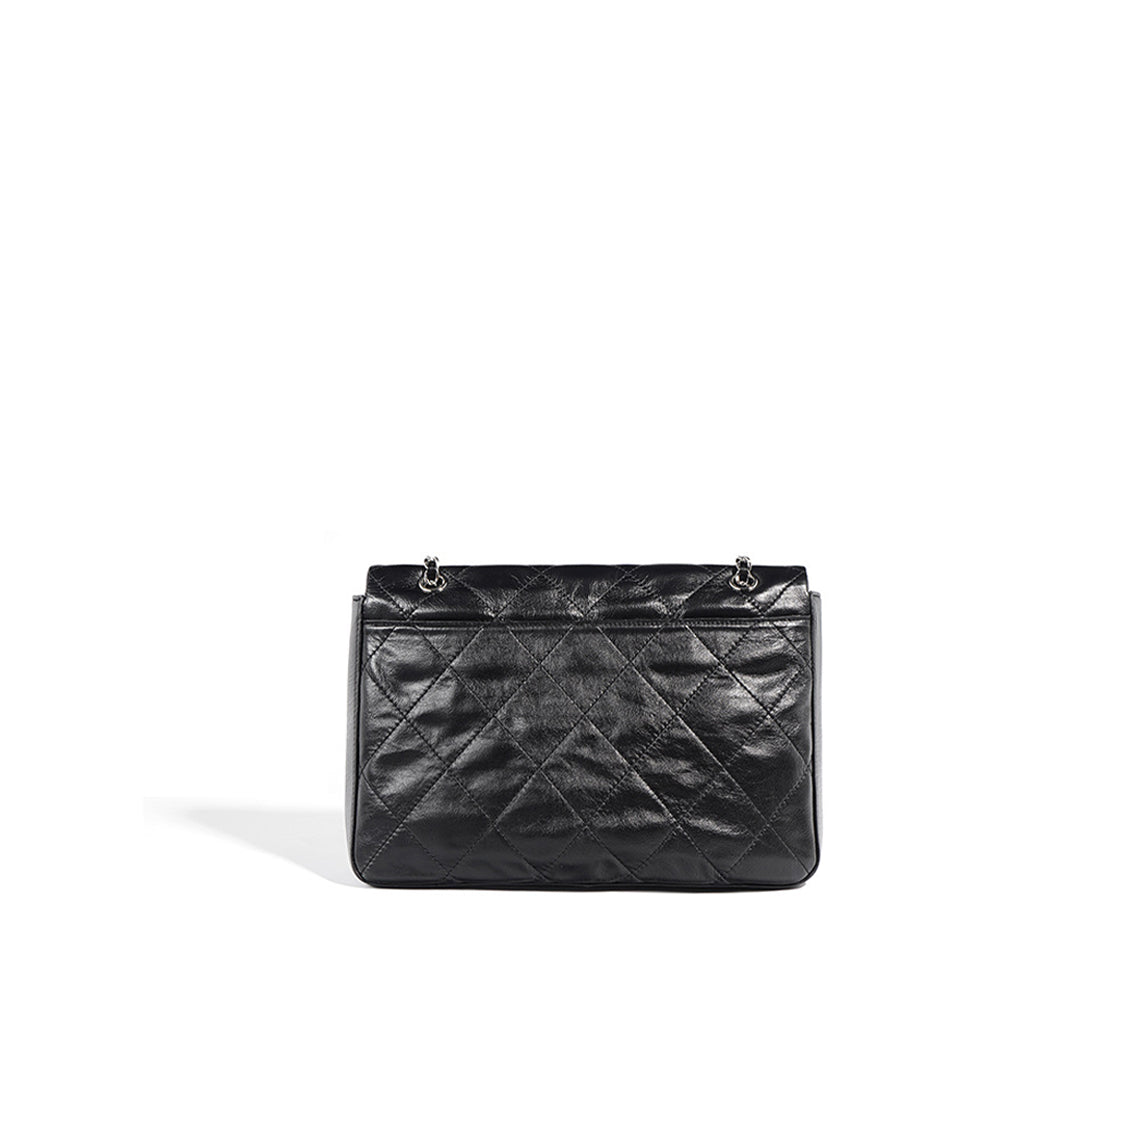 Black Chain Bag | Quilted Leather Bag with Chain Strap - POPSEWING™